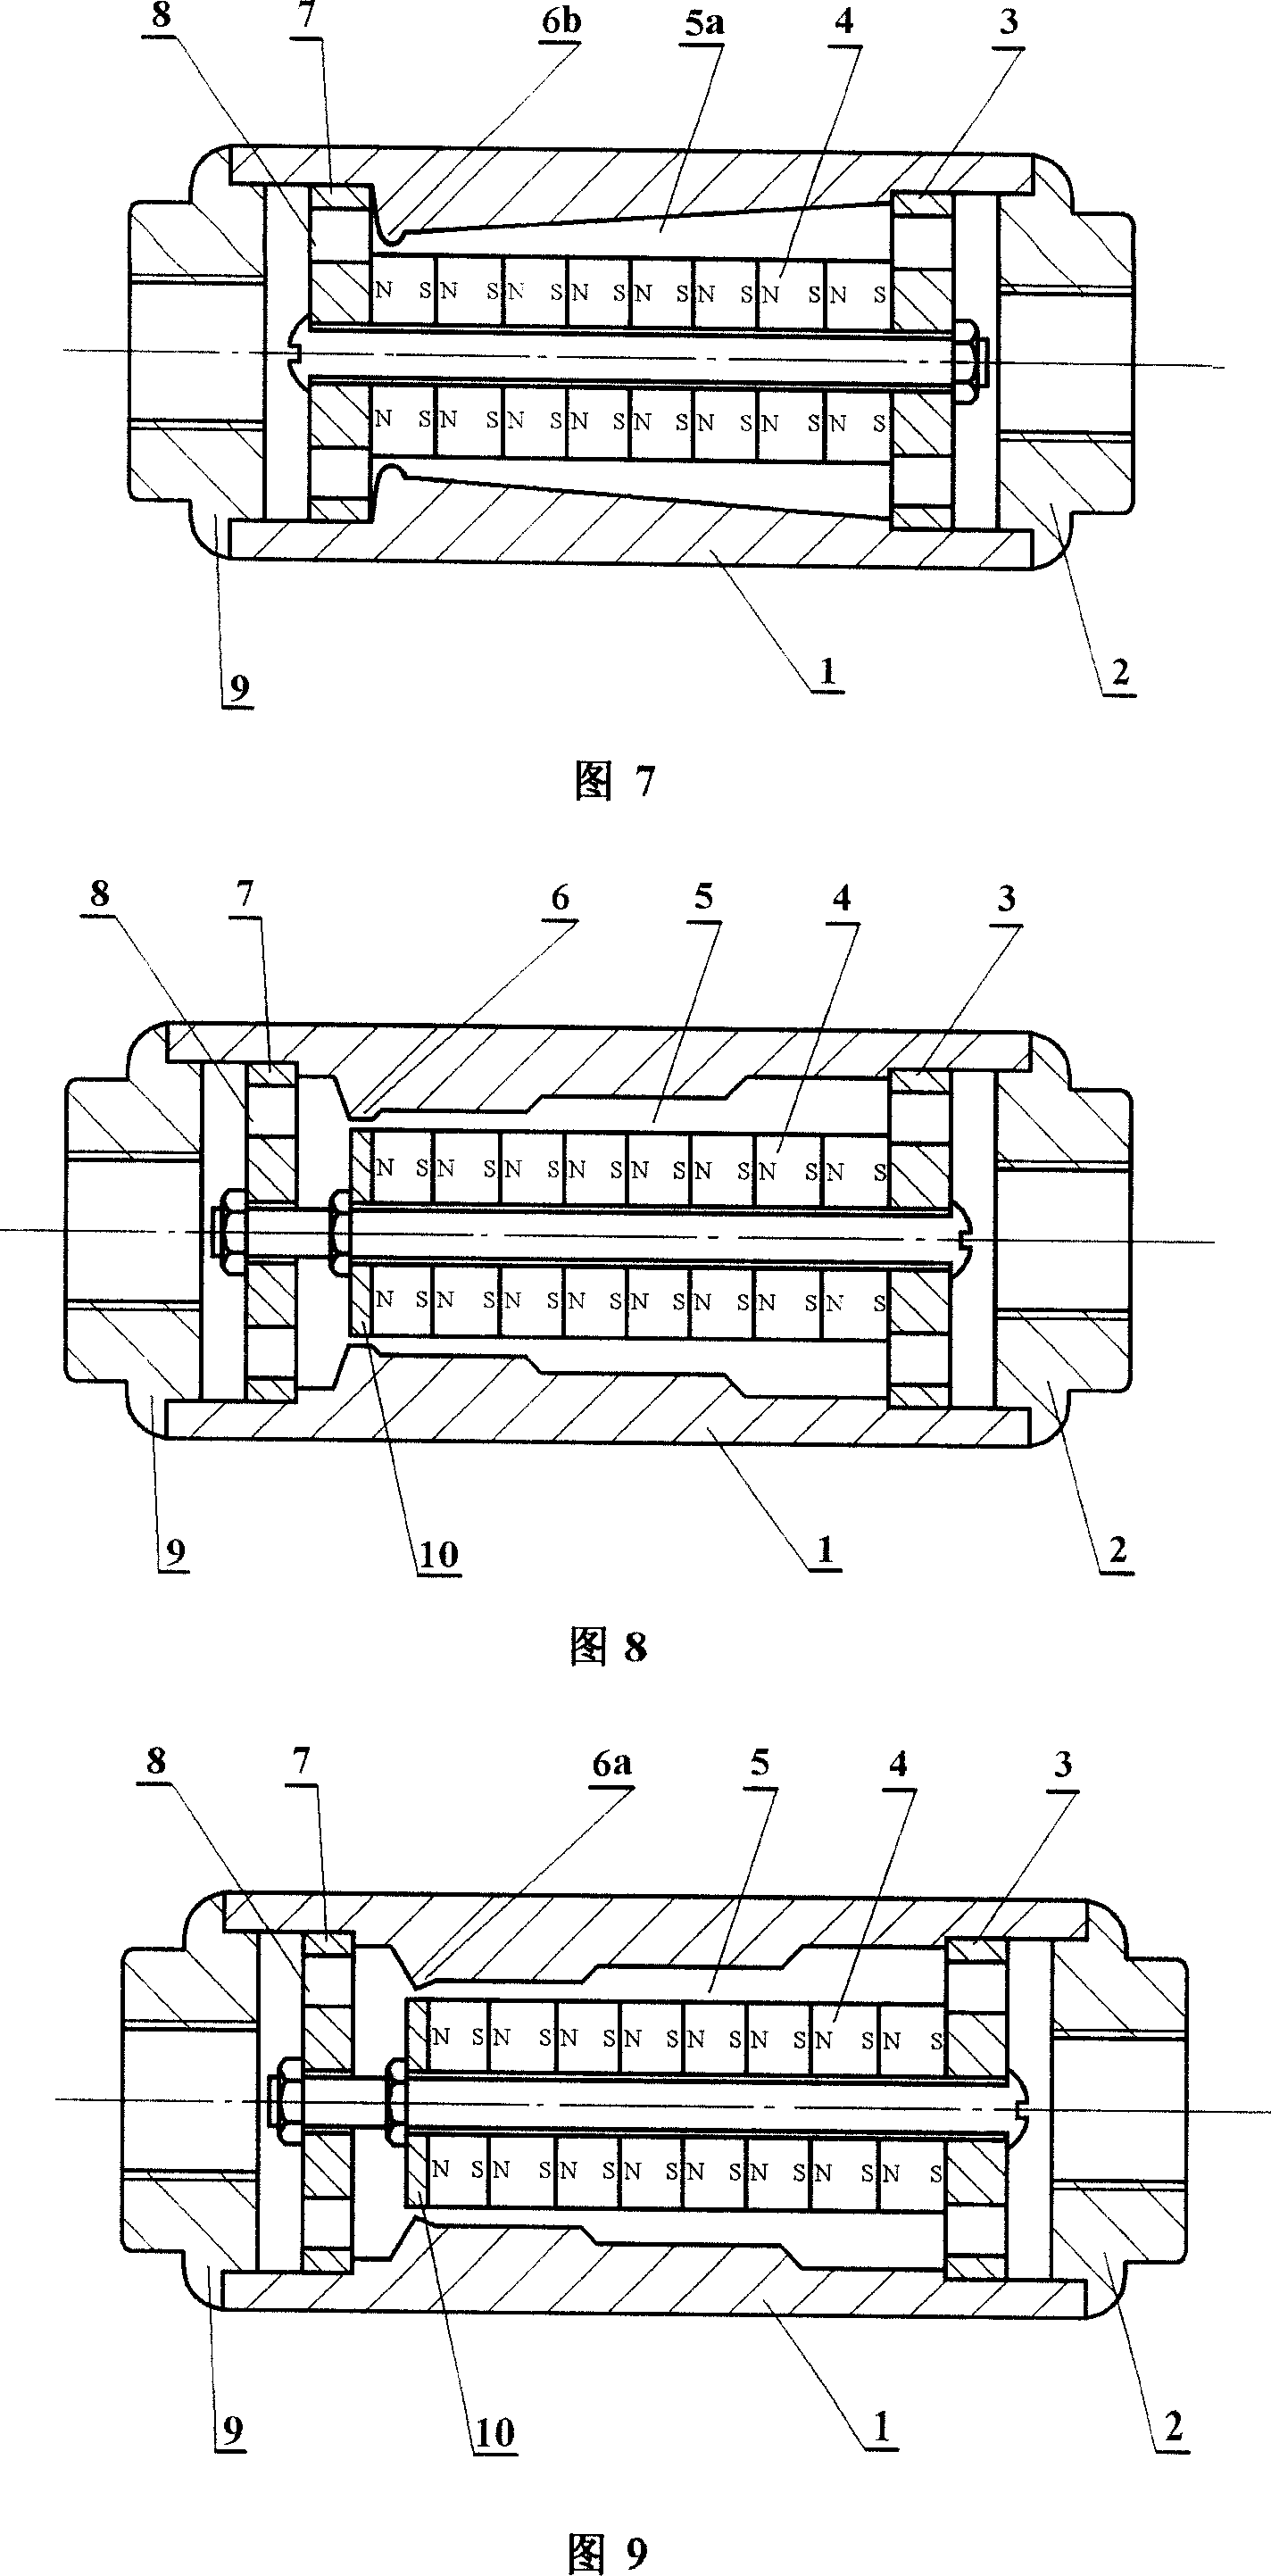 Magnetization device for saving oil